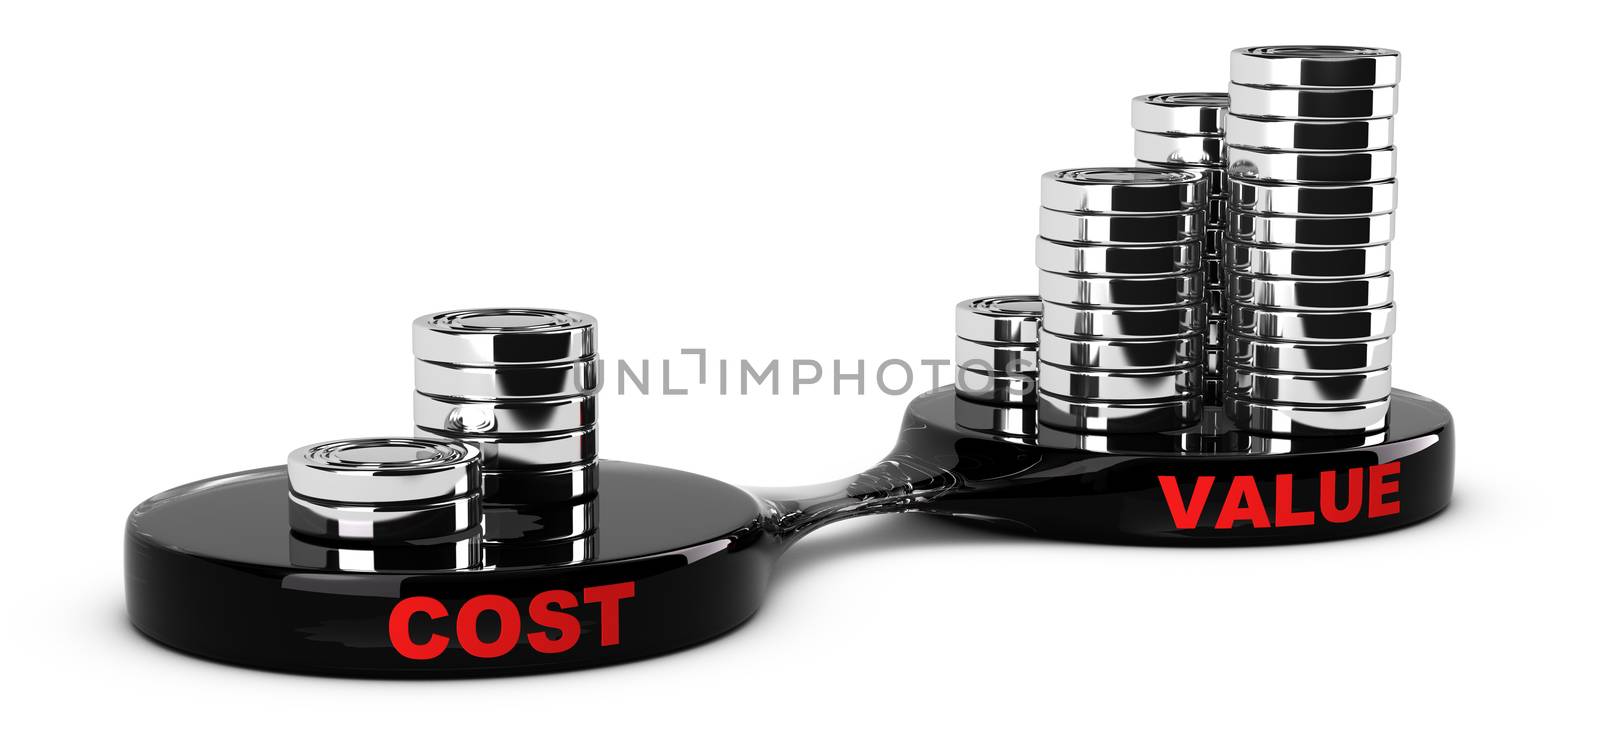 Cost and Value Concept, abstract coins piles. Conceptual image for marketing analysis.